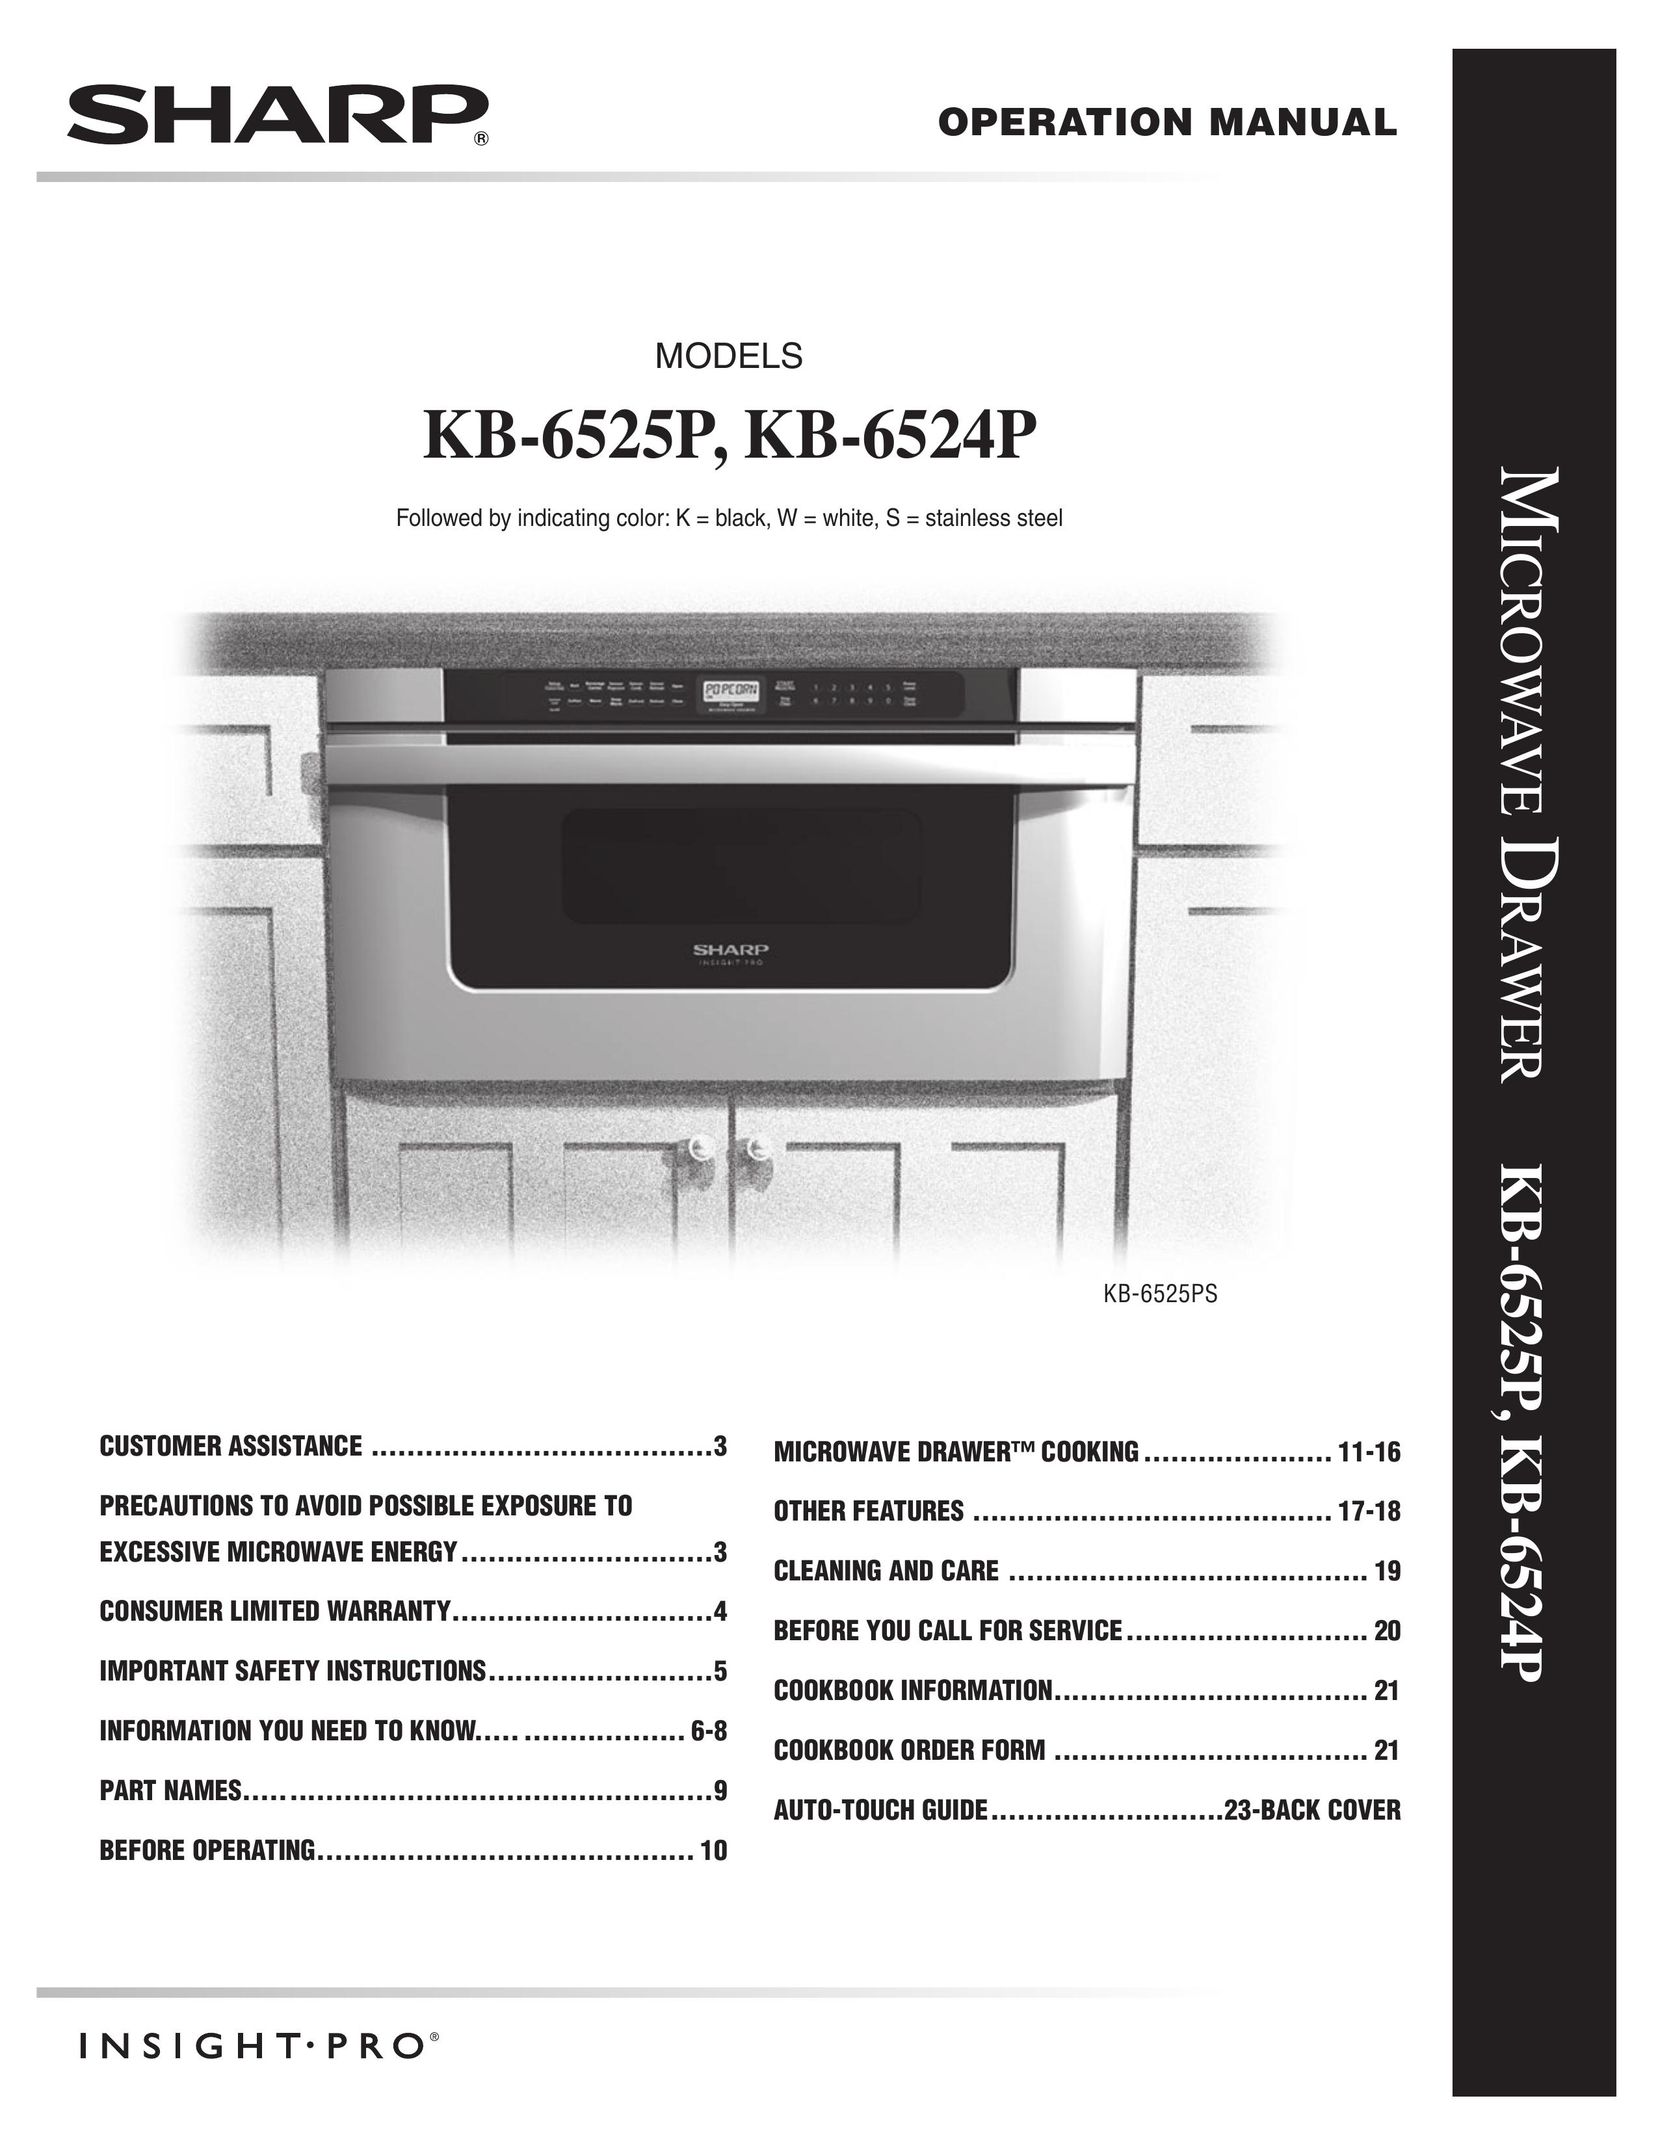 Sharp KB-6525PS Microwave Oven User Manual